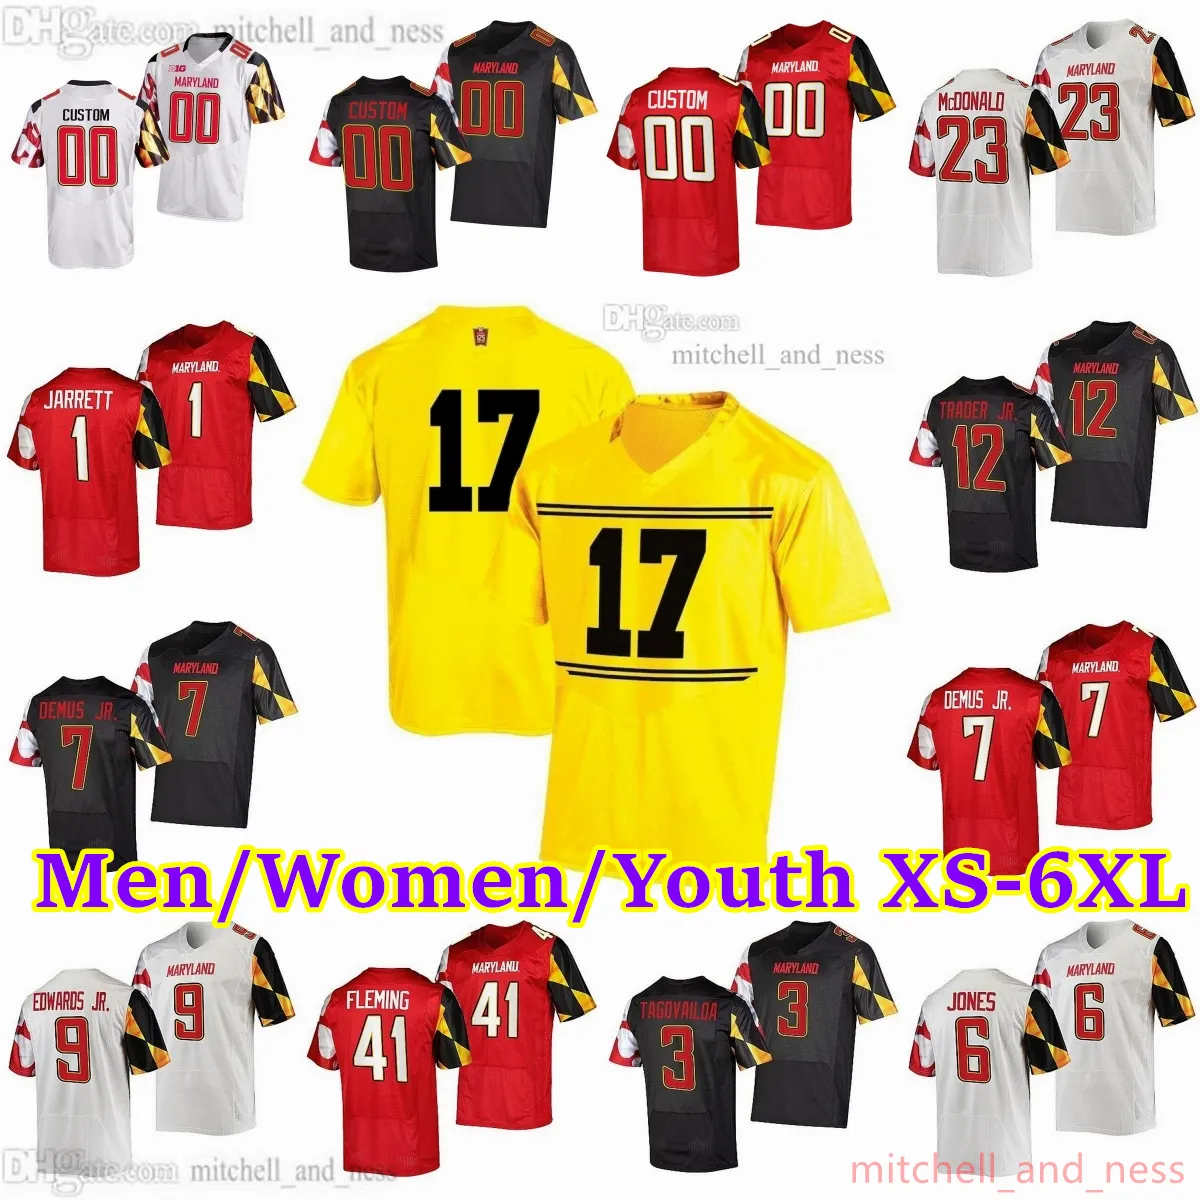 Ryland Chad youth jersey